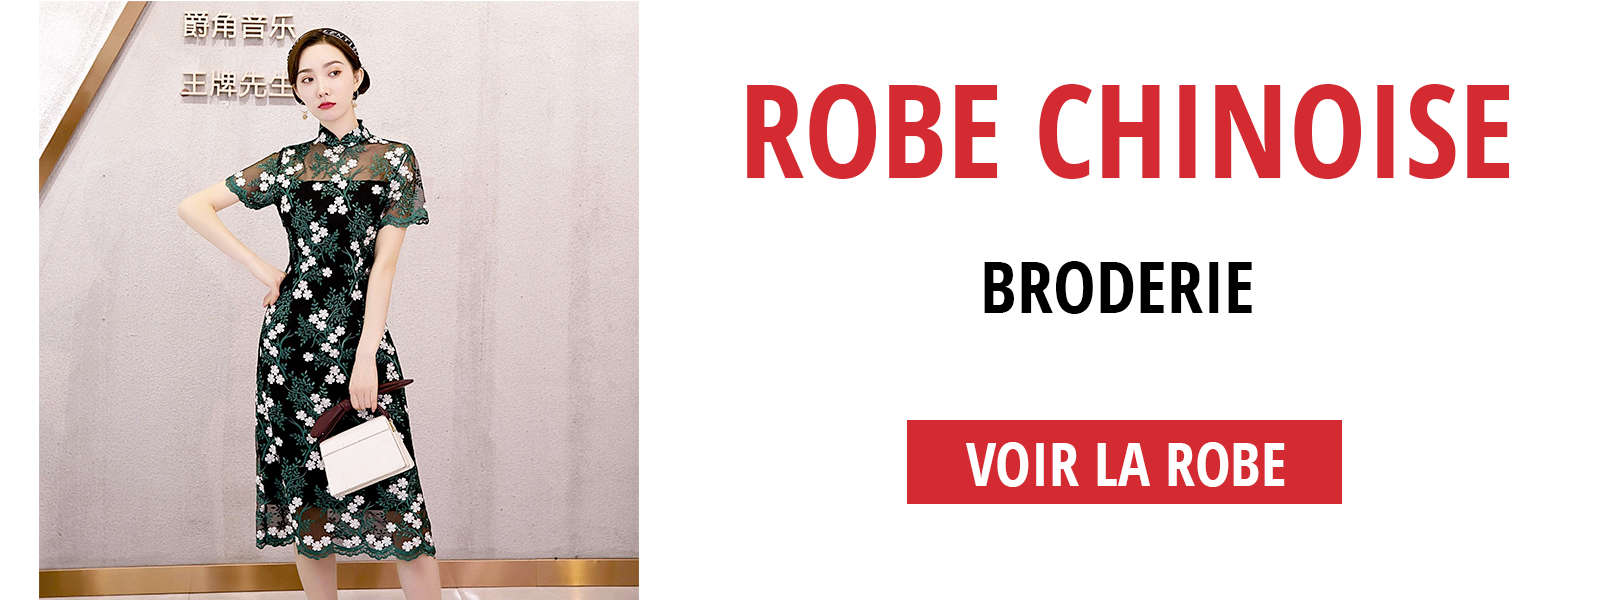 Robe chinoise Broderie